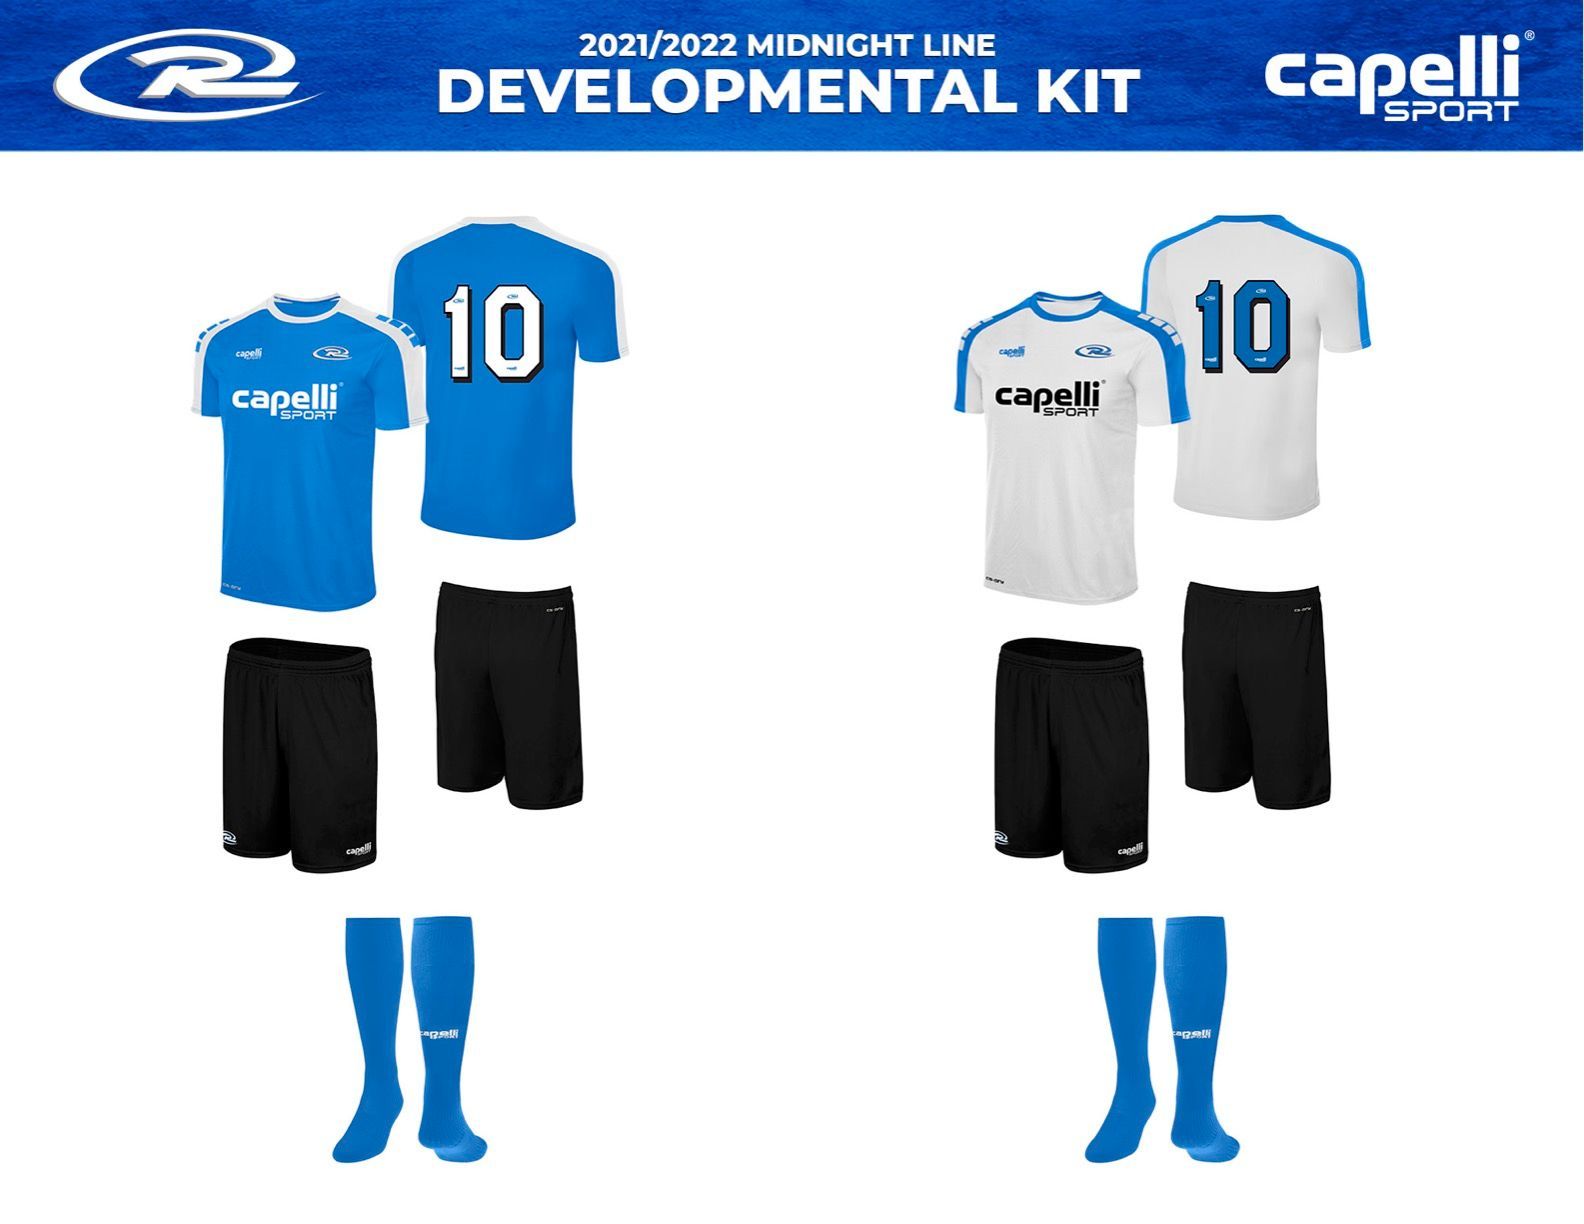 To order your players uniform please go to the following link